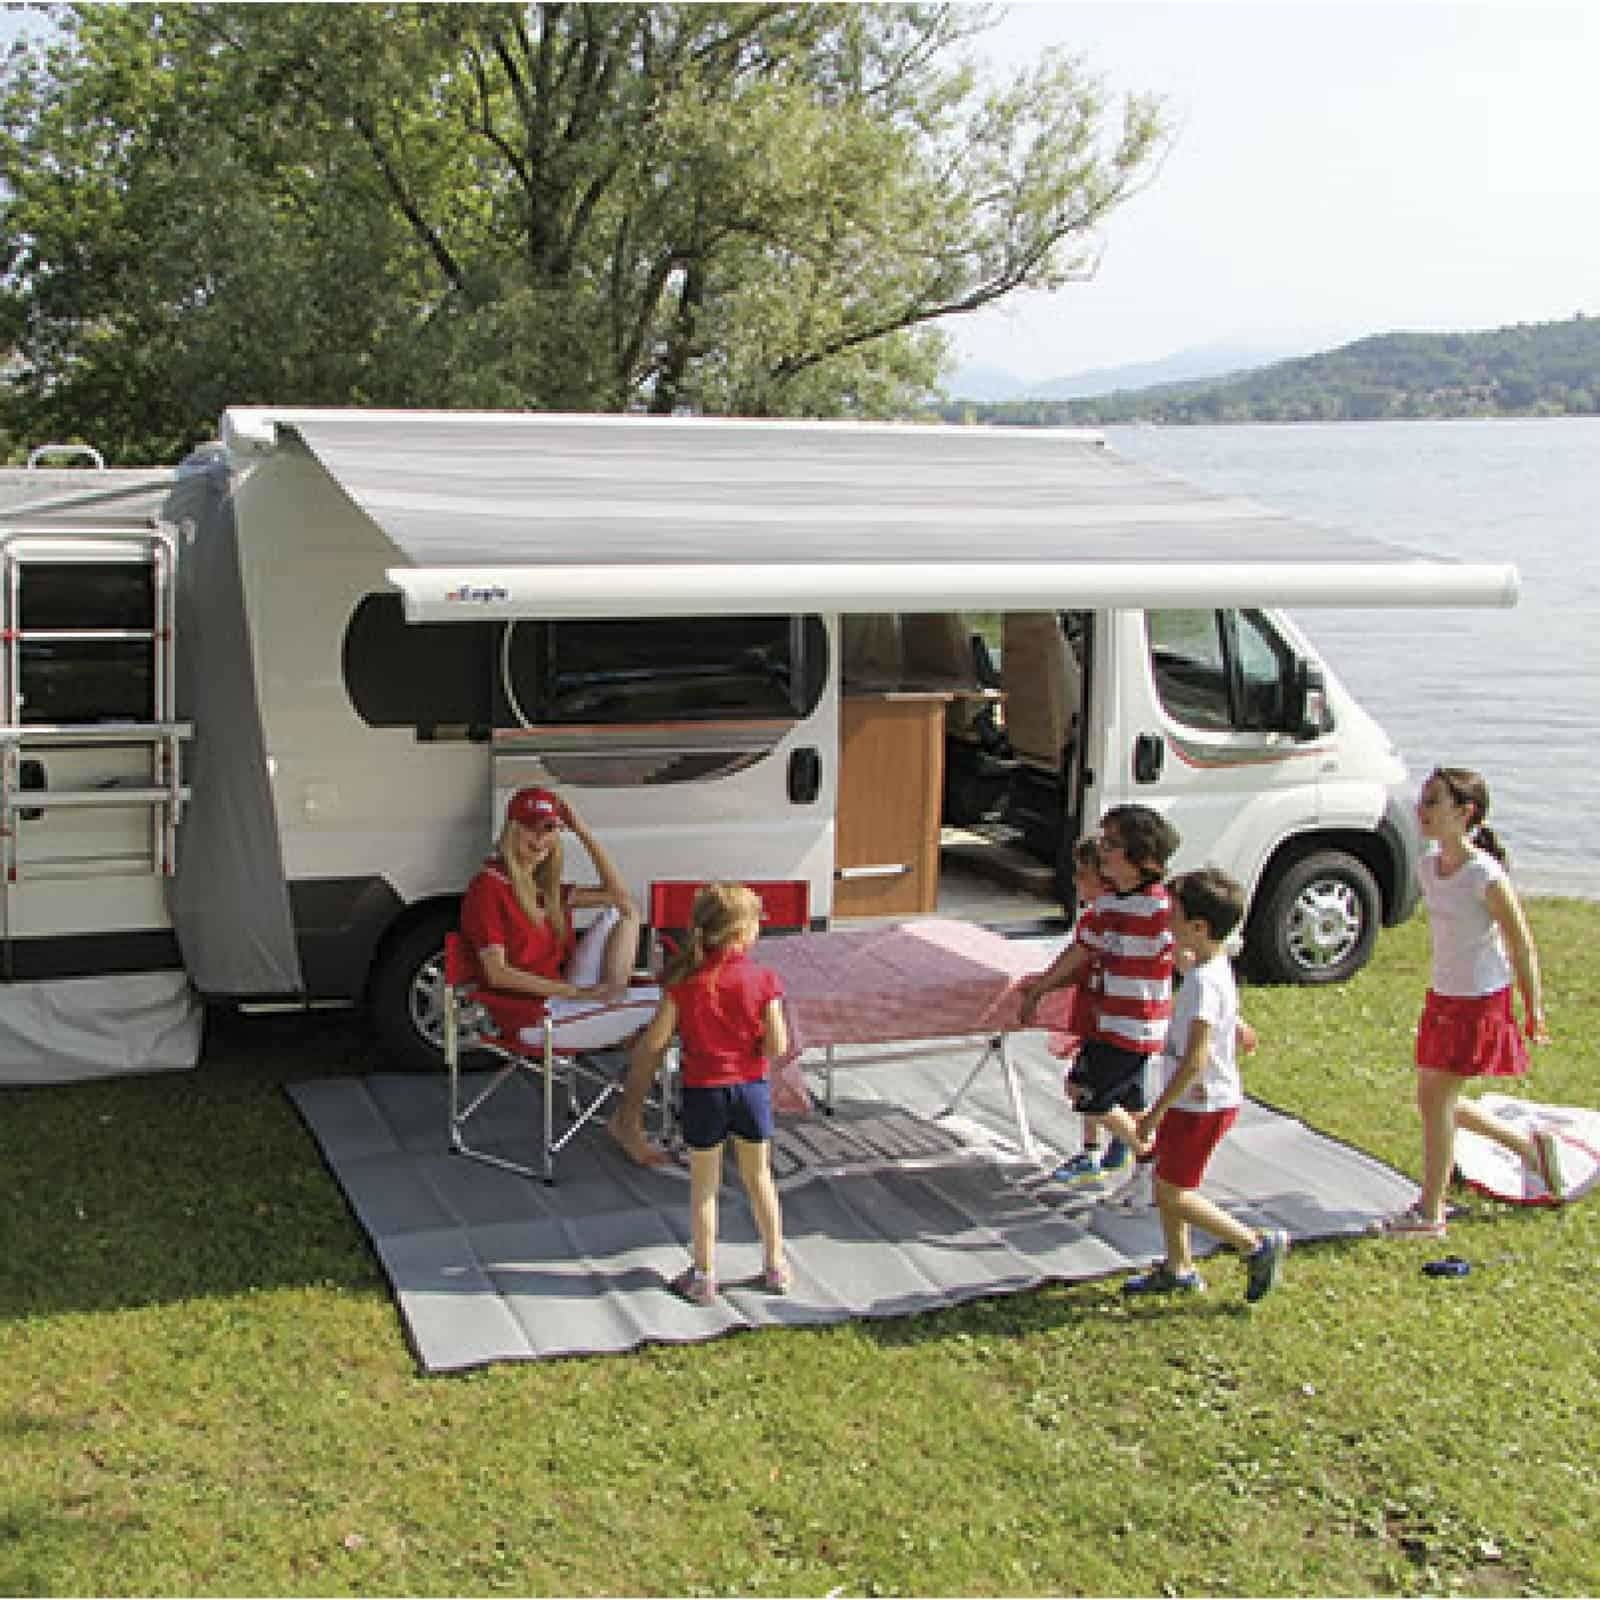 Fiamma F65 Eagle Ducato Polar White Automatic Motorhome Awning made by Fiamma. A Motorhome Awnings sold by Quality Caravan Awnings